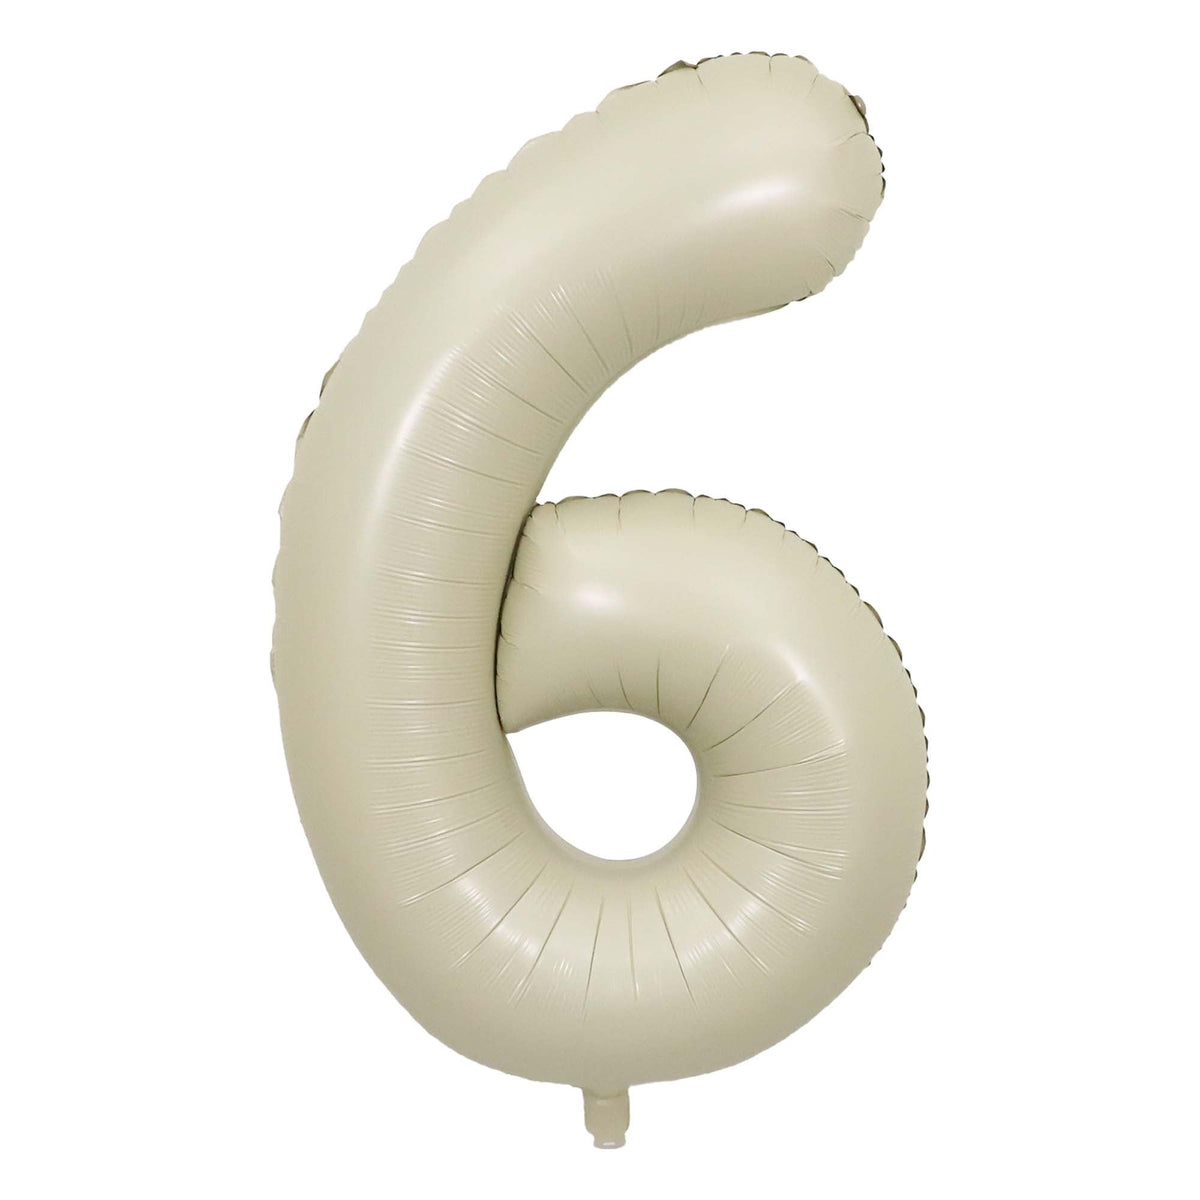 PARTYGRAM Balloons Ivory Number 6 Foil Balloon, Creamy White Matte Finish, 34 Inches 810077658307